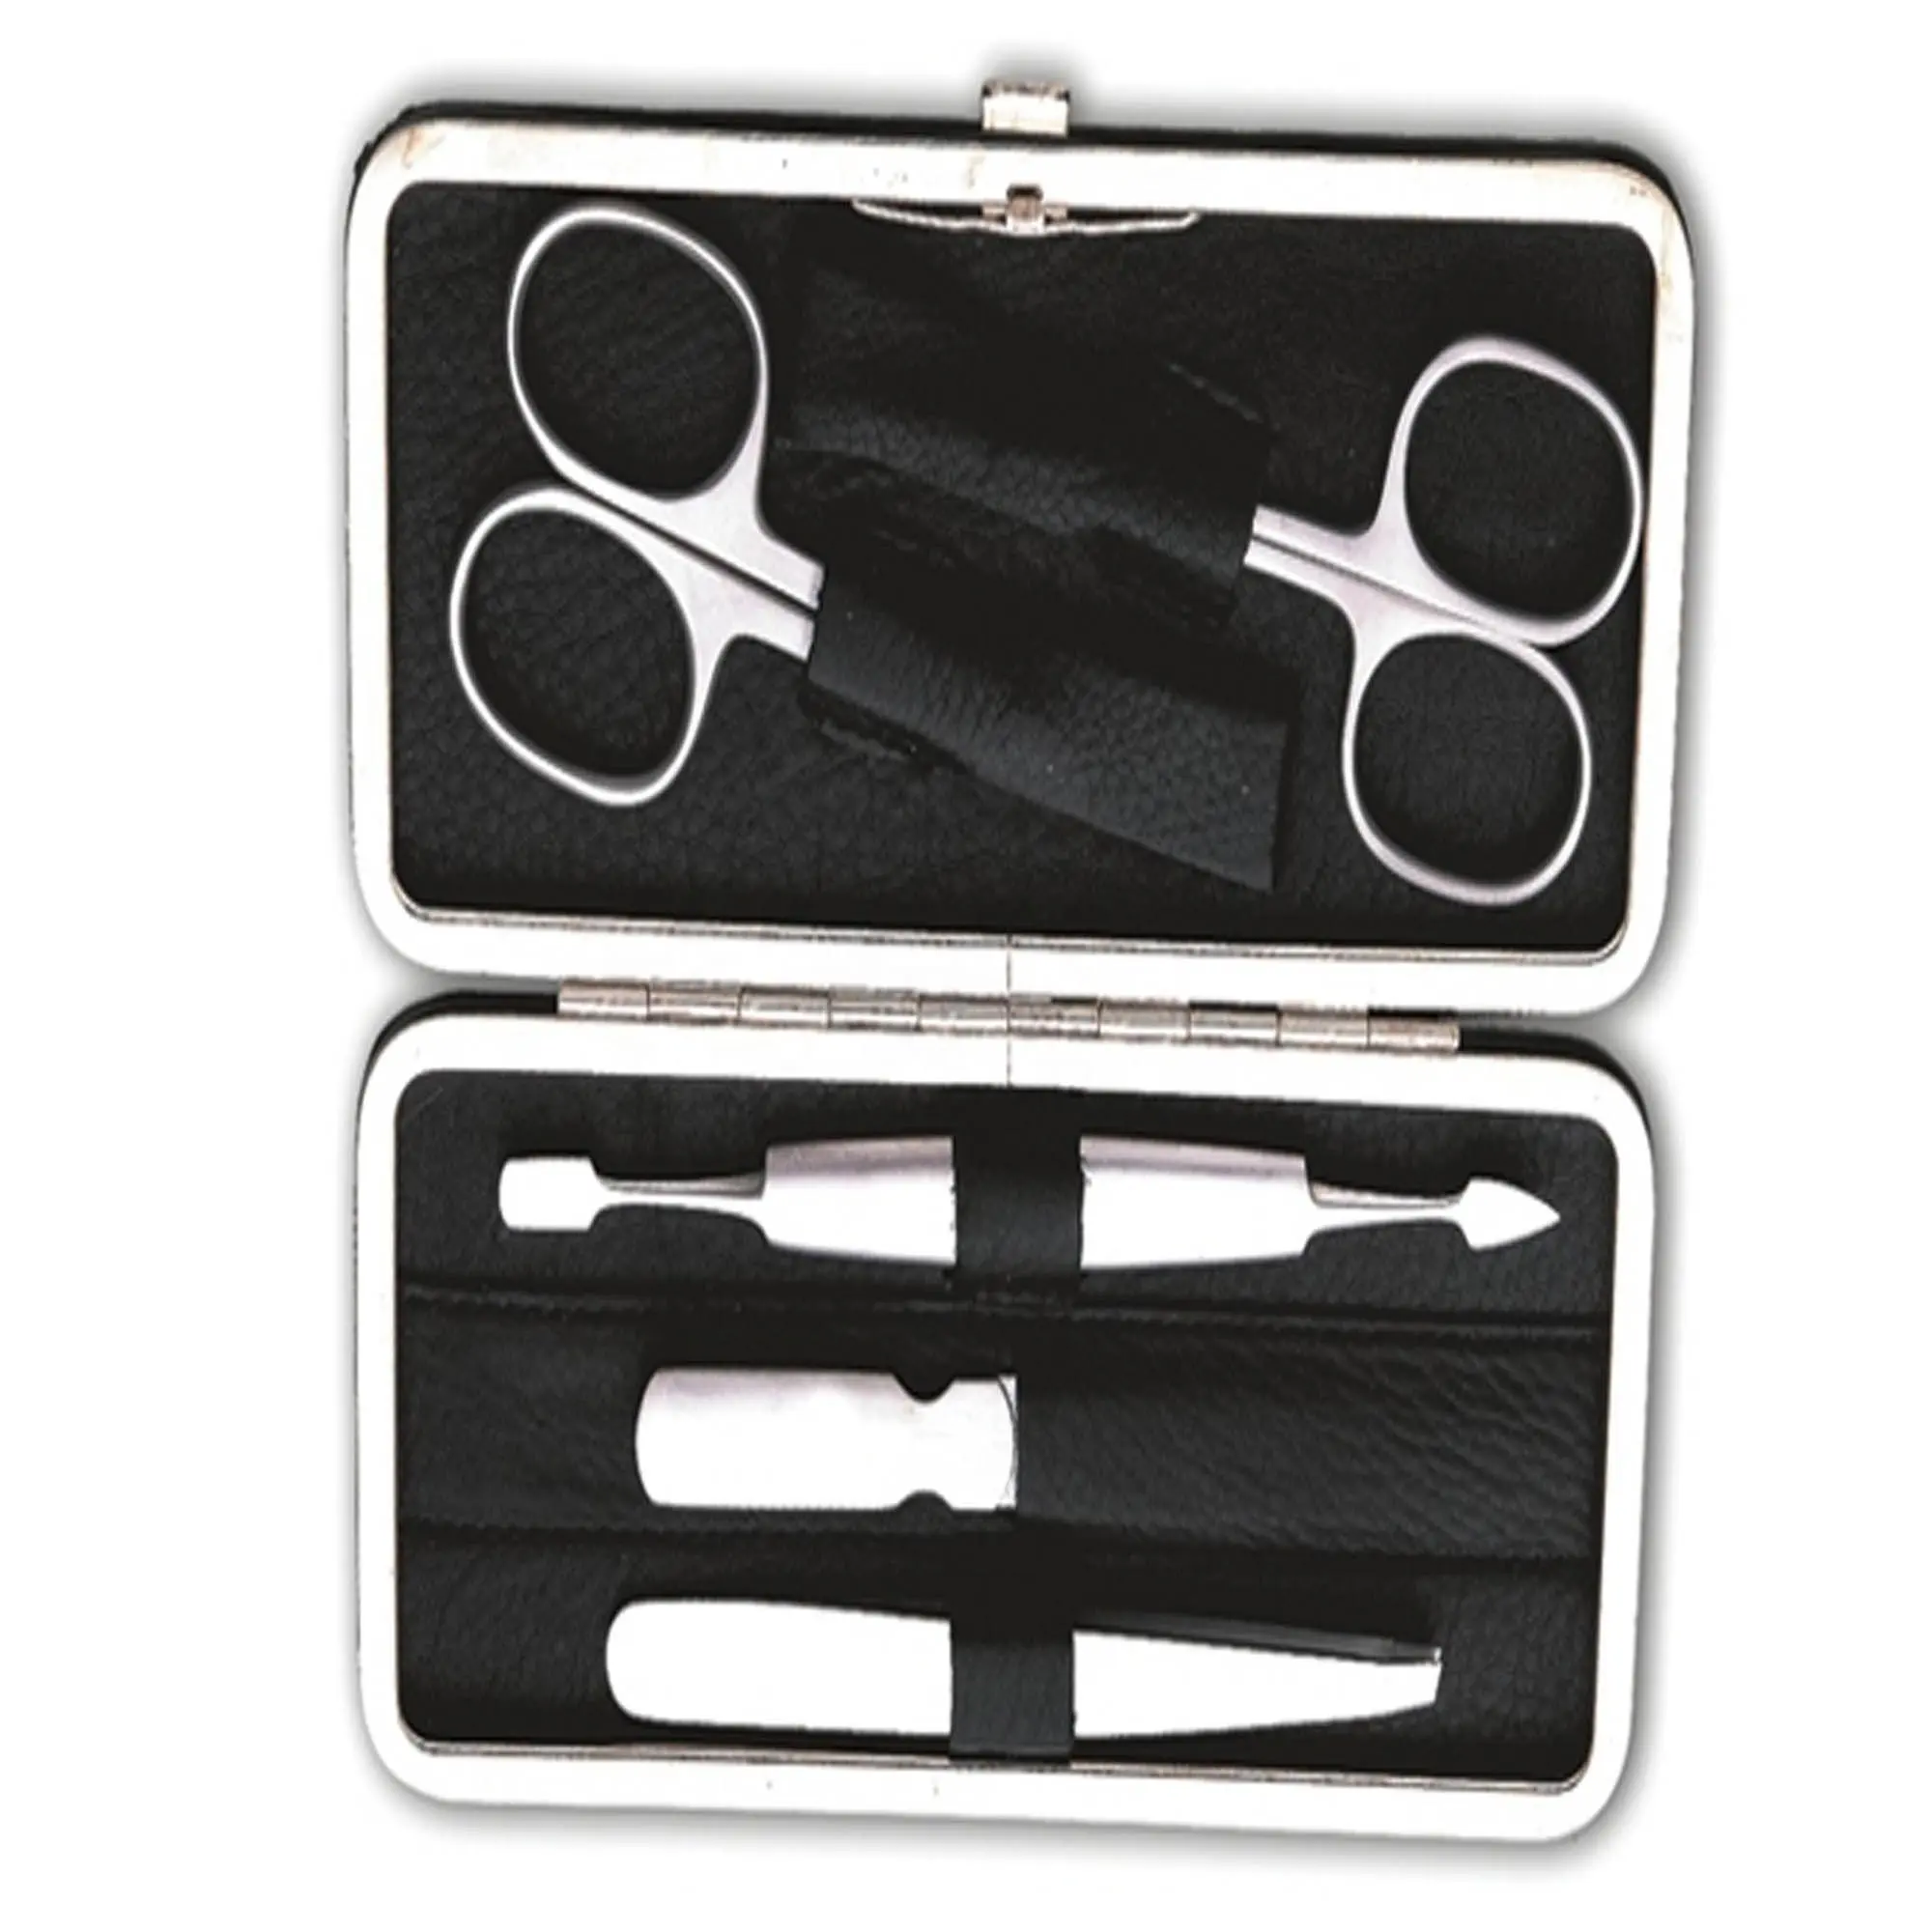 Wholesale Manicure set stock nail clippers eyebrow kit pedicure care tools stainless steel women grooming kit